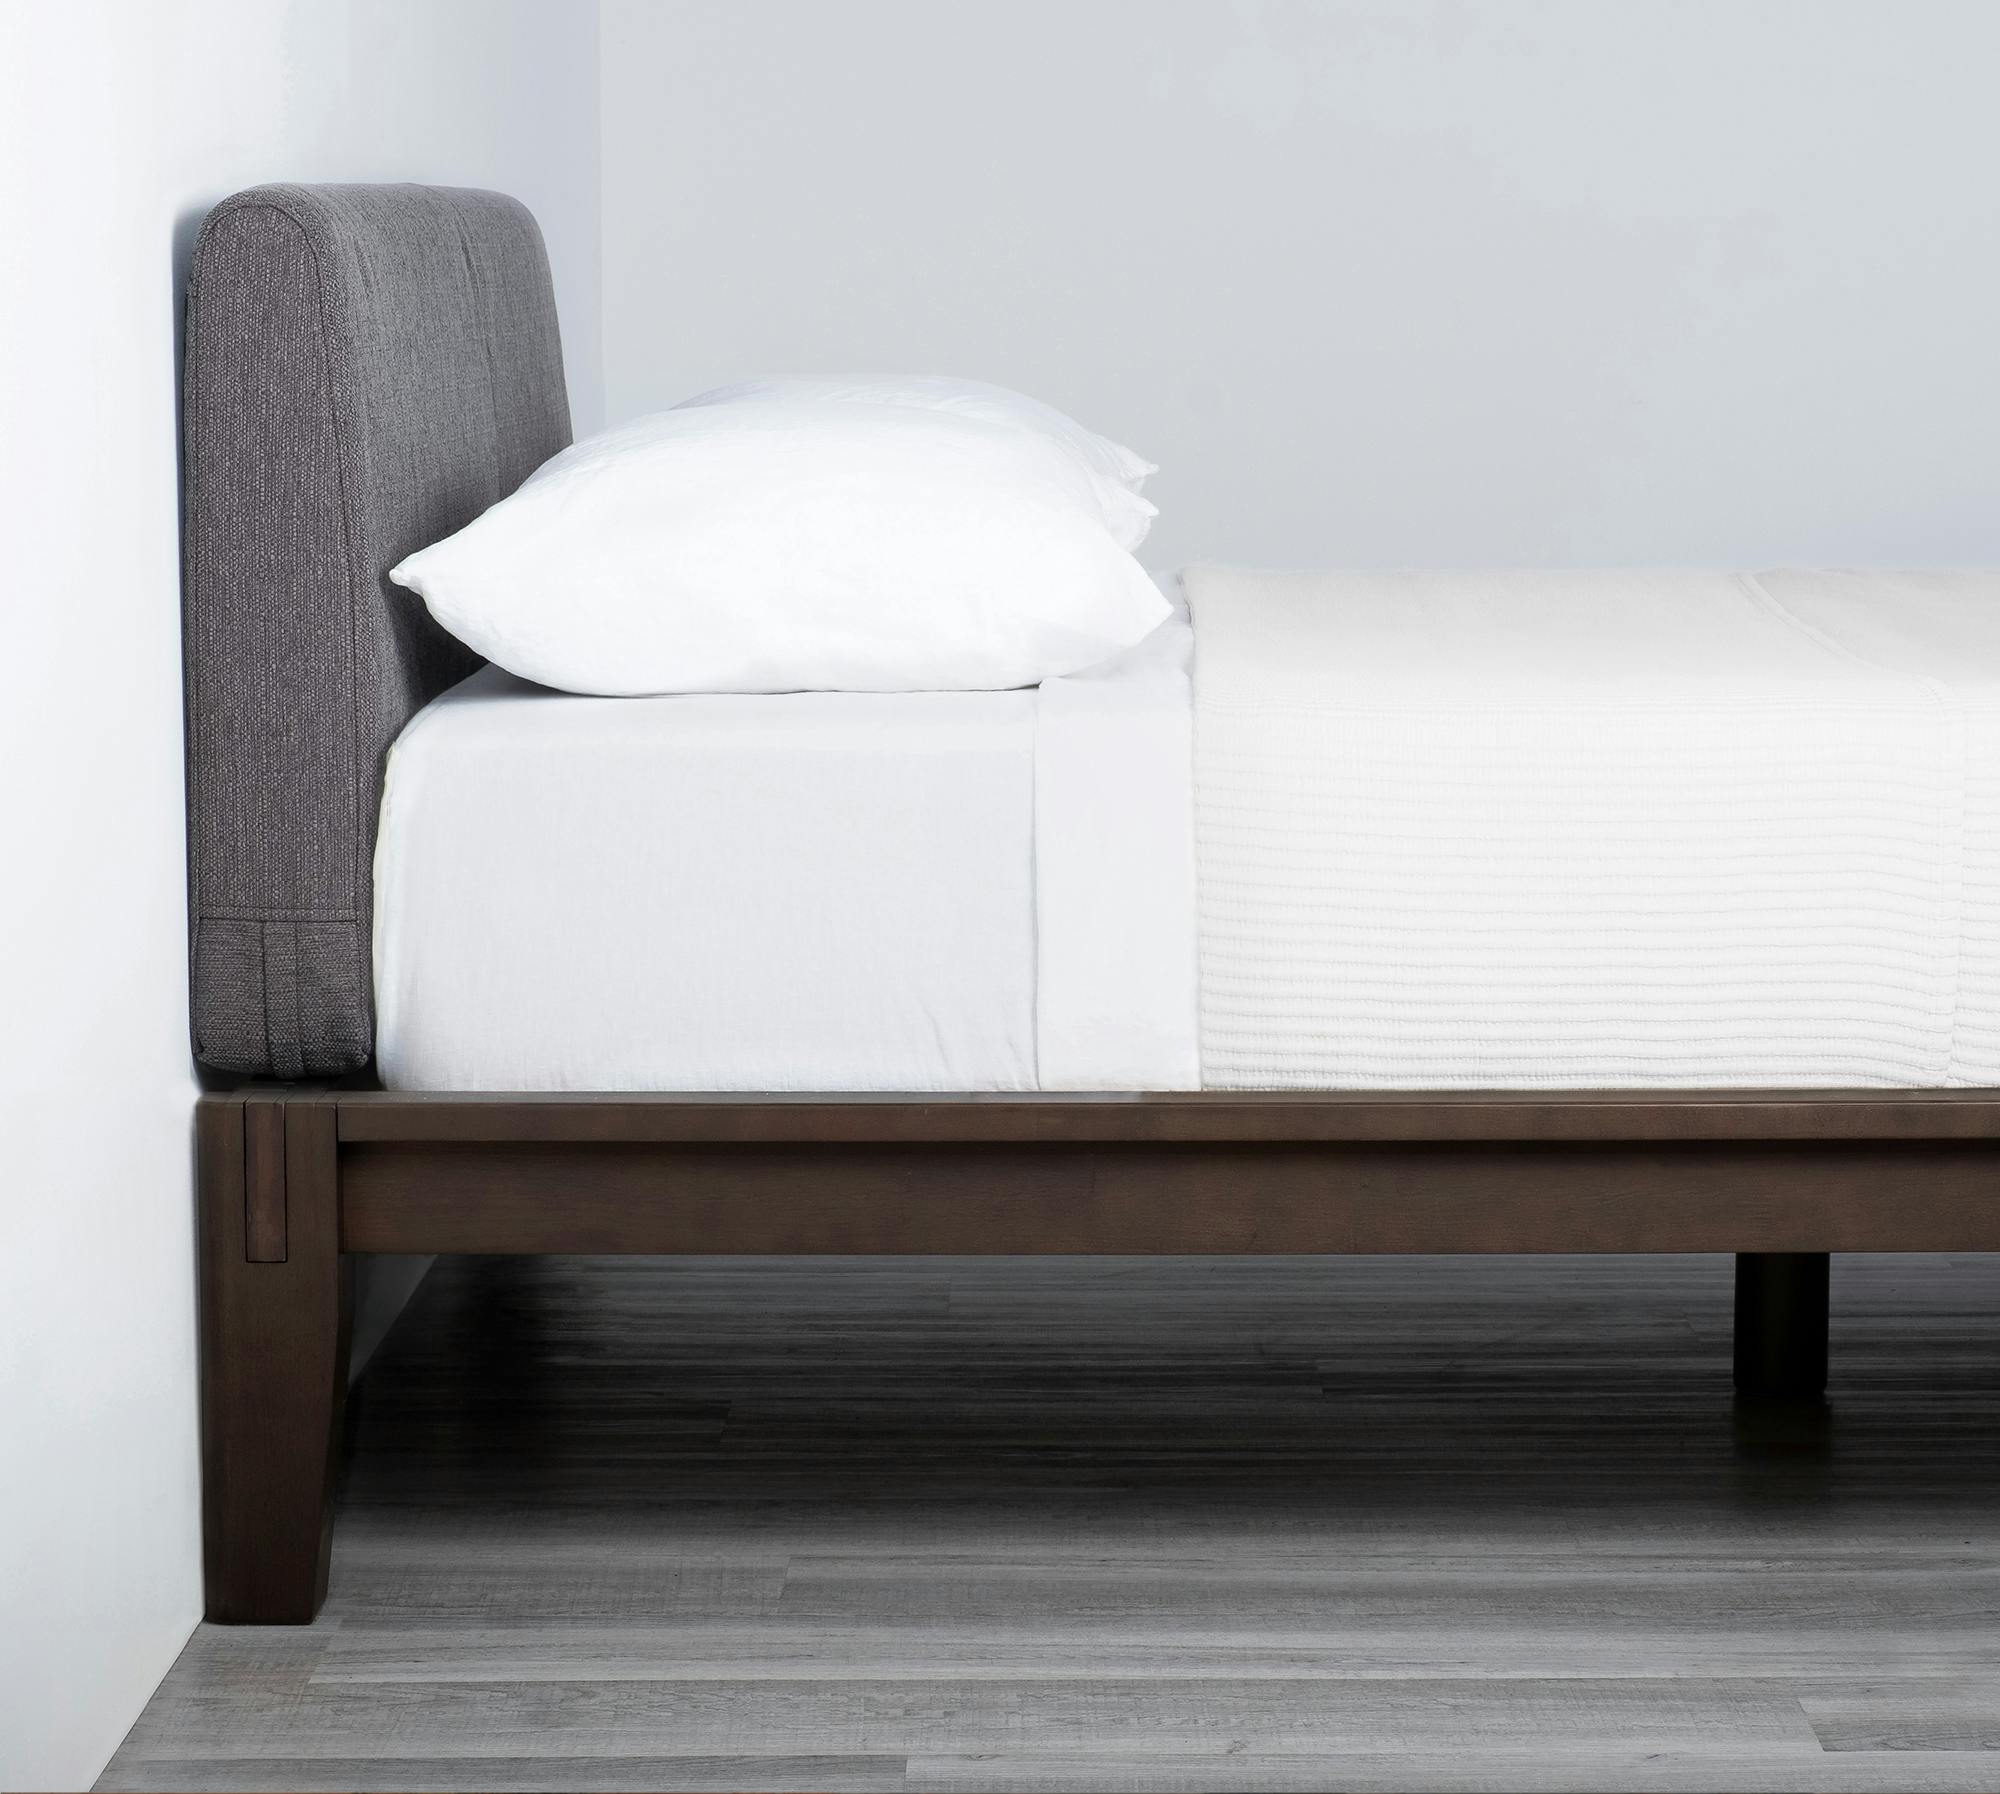 The Bed (Espresso / Dark Charcoal) Side